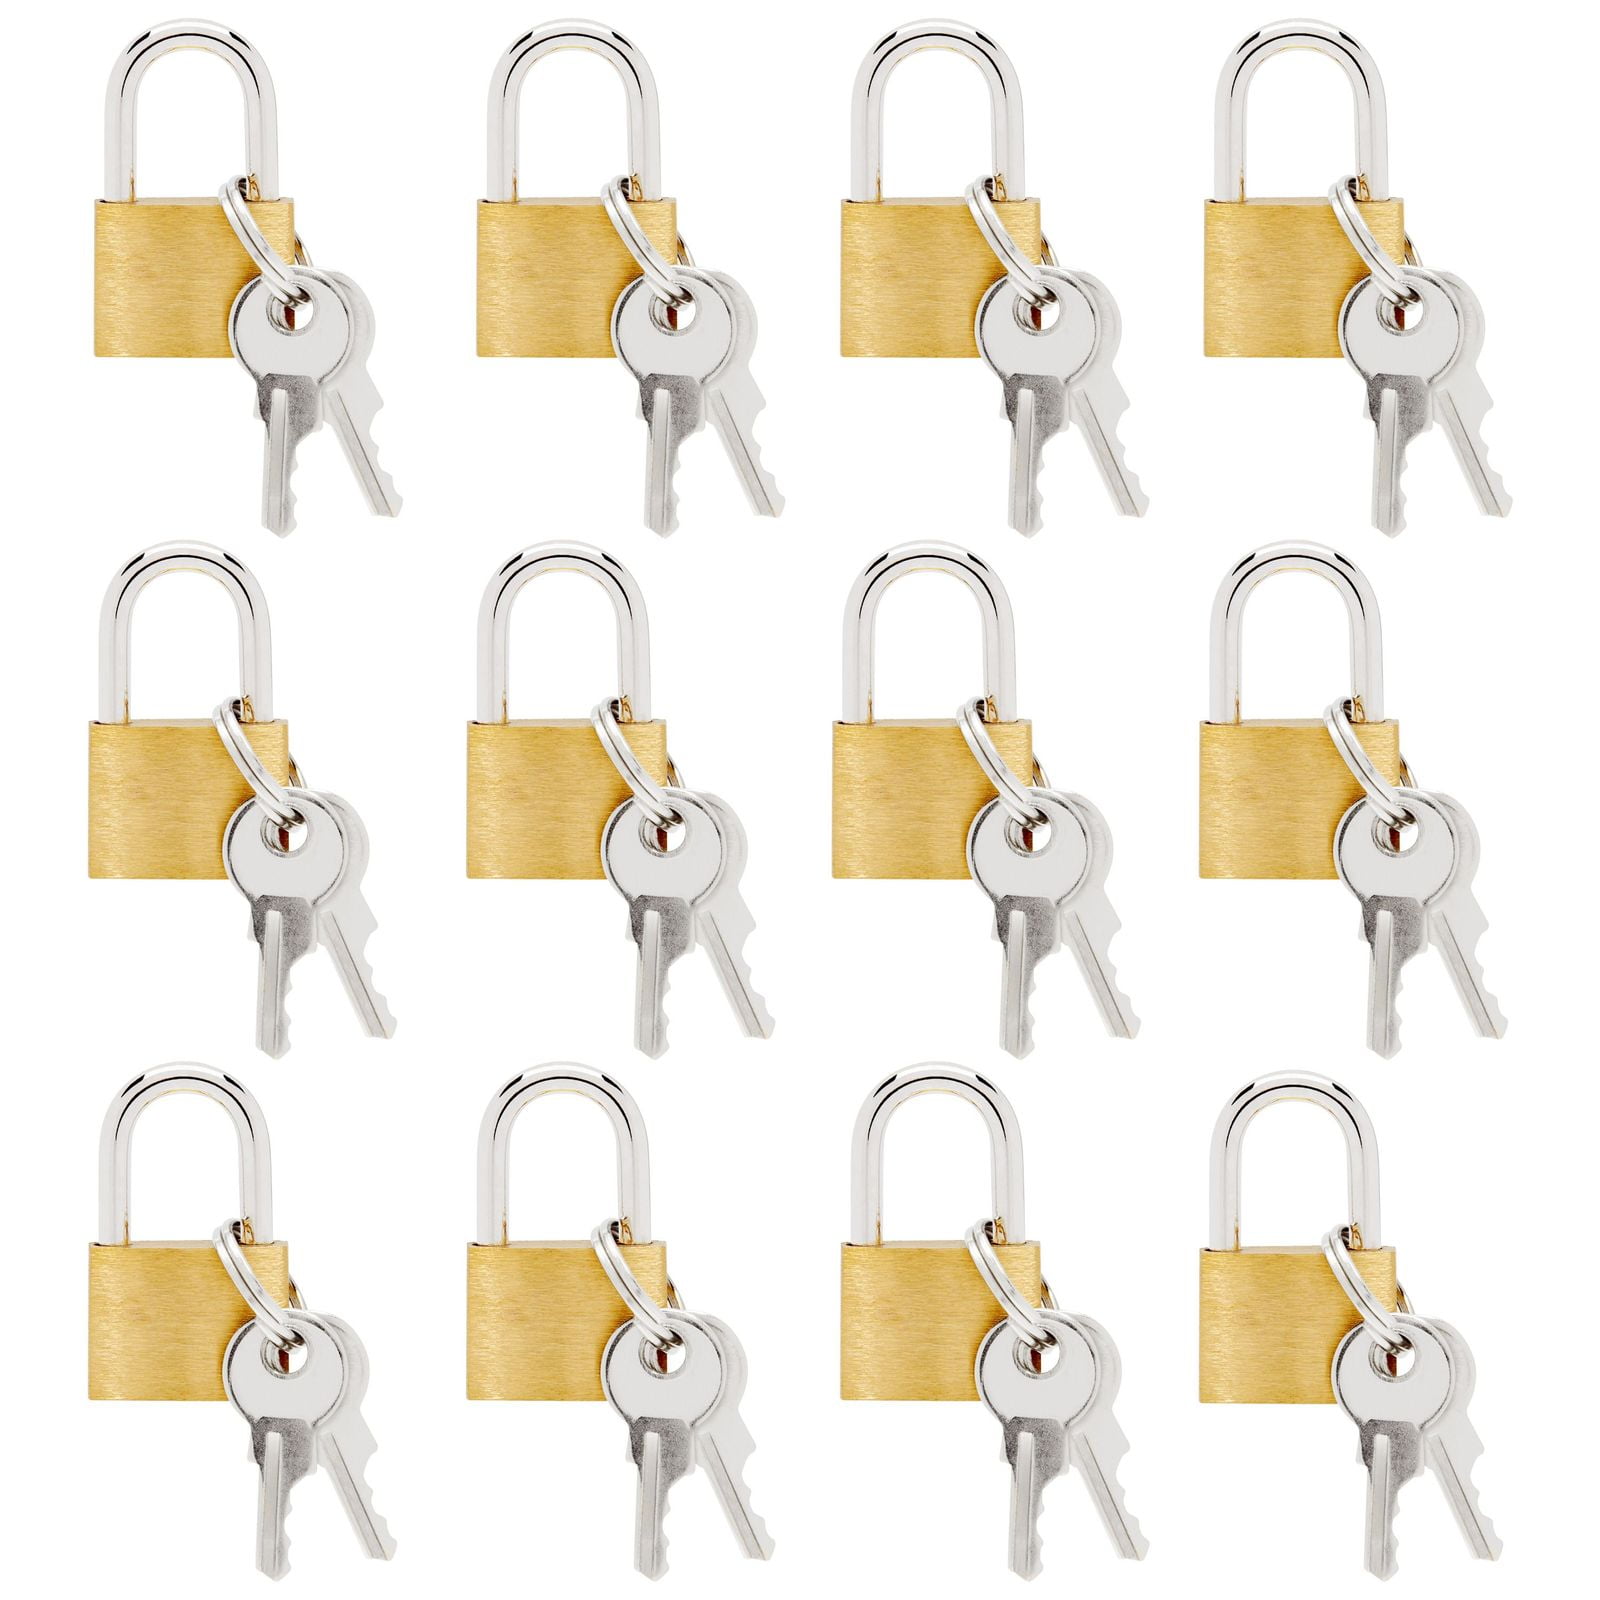 KEYS BAGS SUITCASE TRAVEL HOLIDAY LUGGAGE 3 SETS BRASS SMALL SECURITY PADLOCKS 